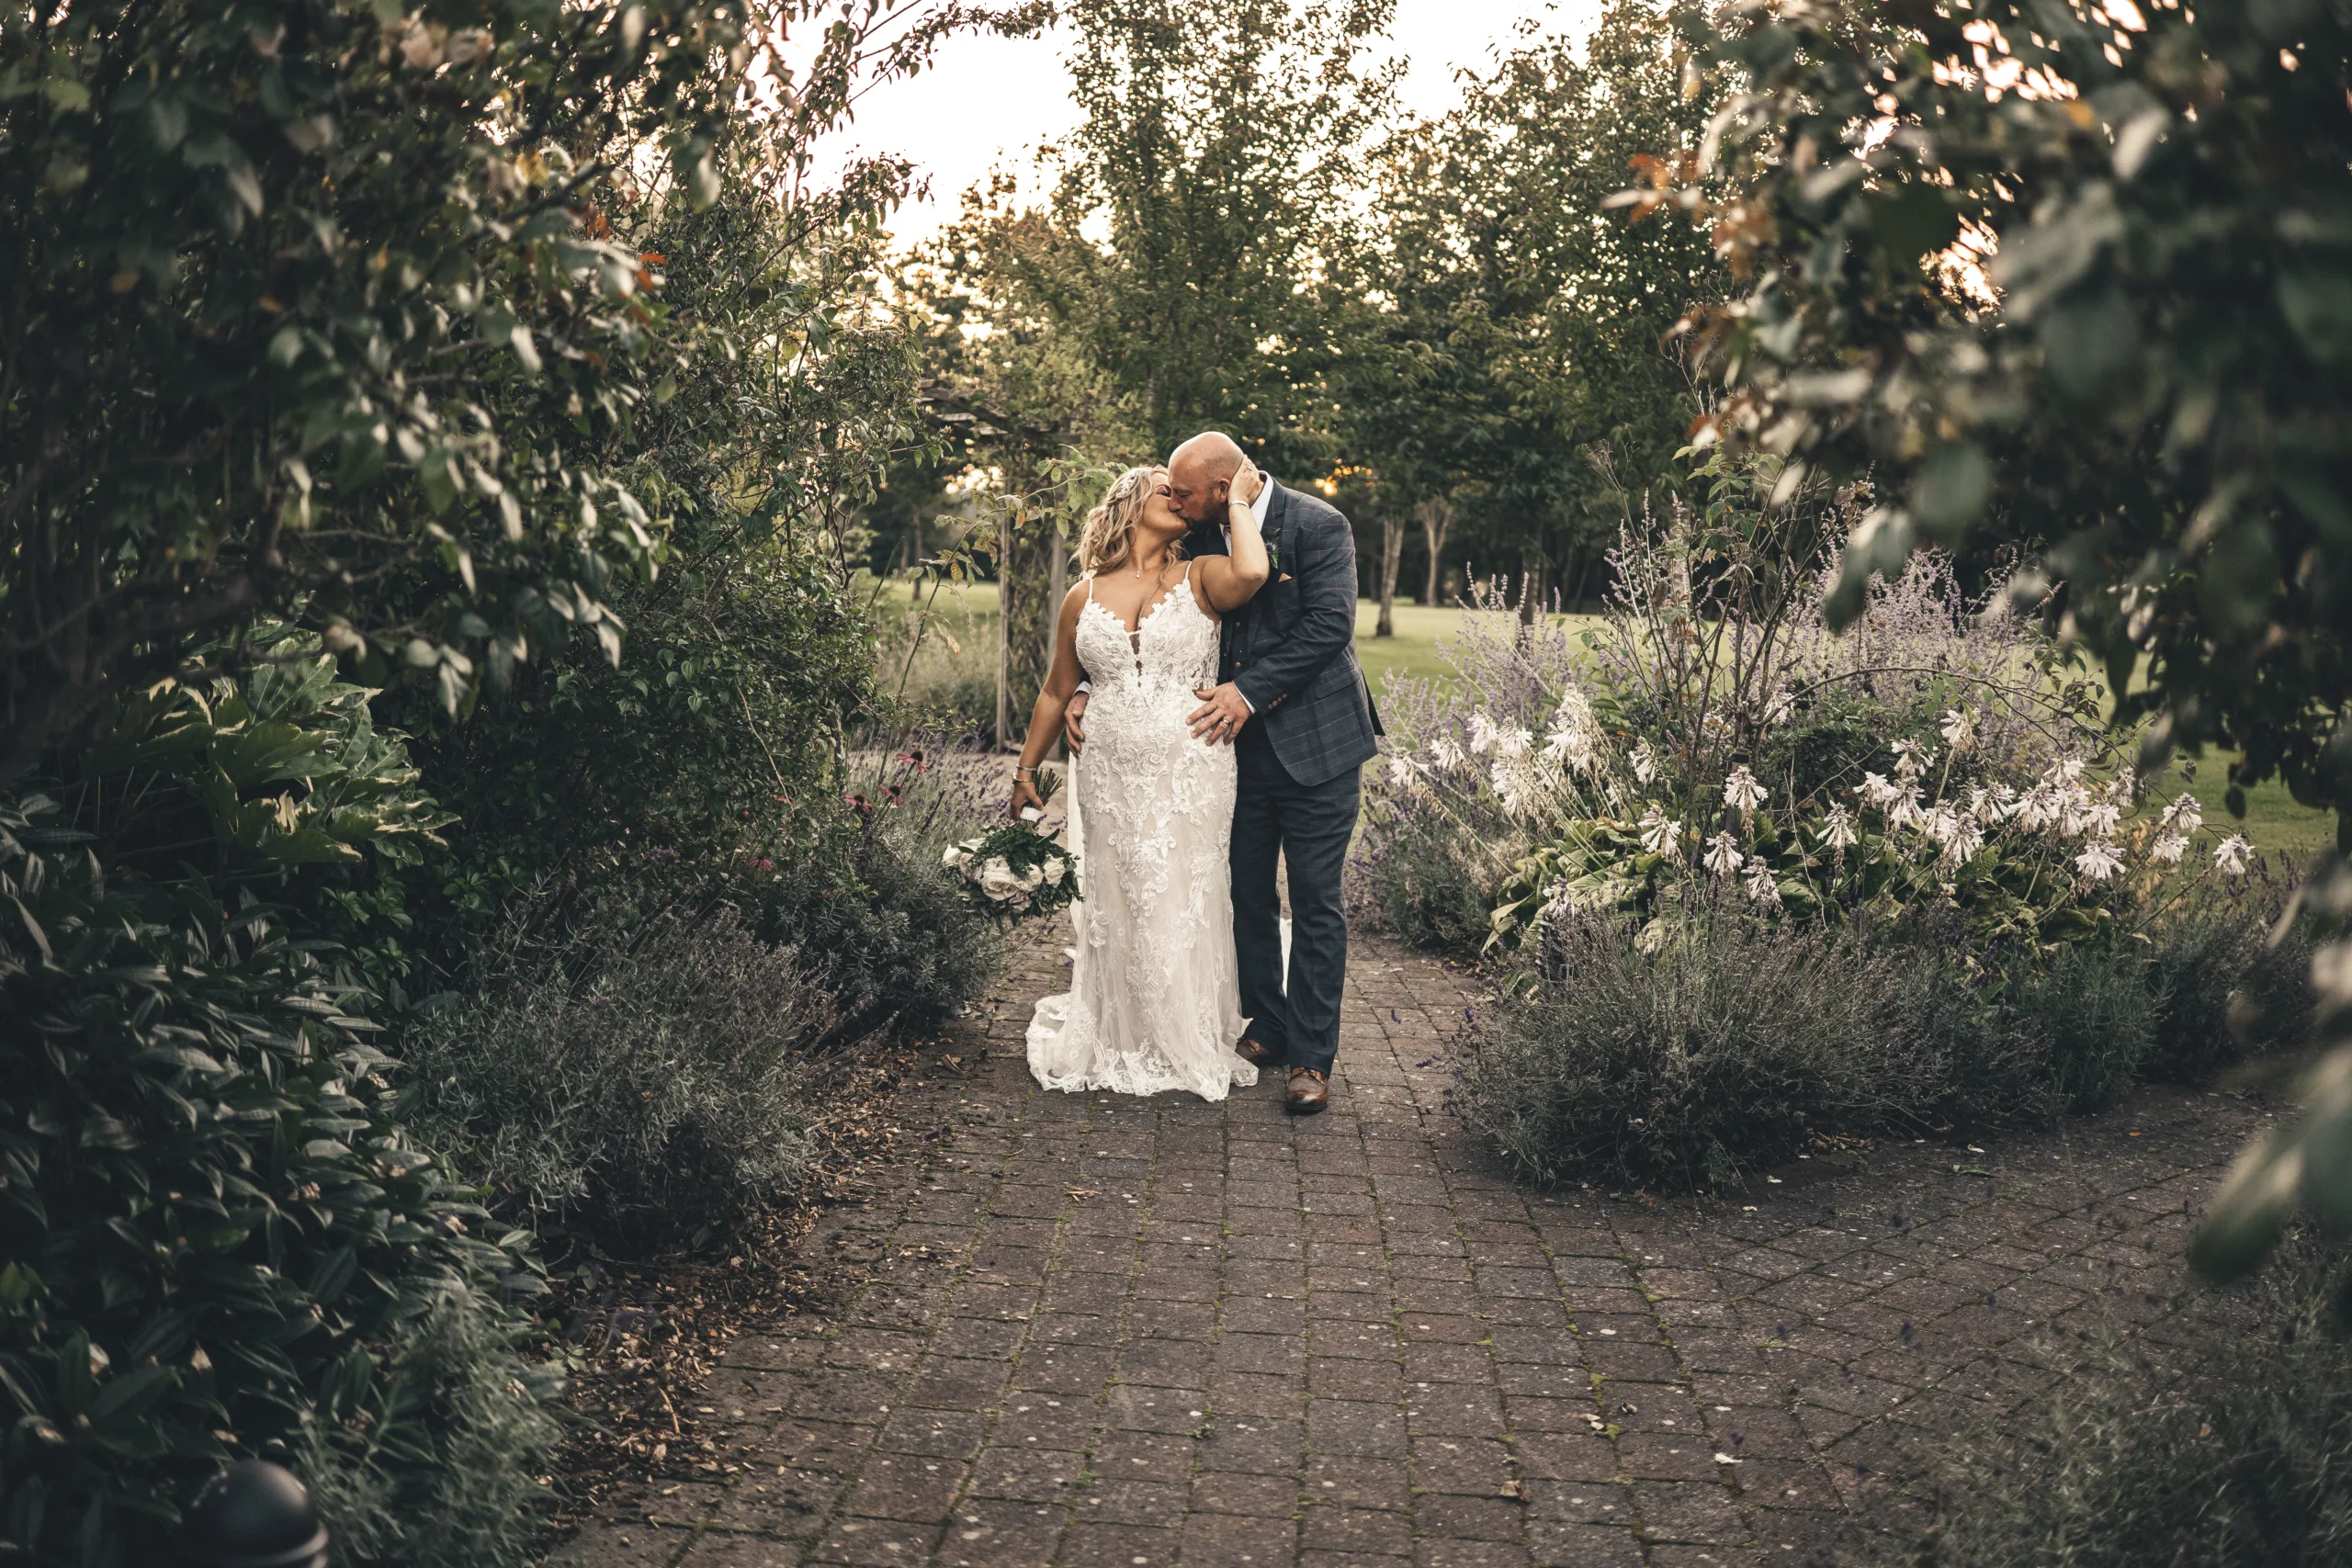 A bride and groom kissing in a garden, beautiful summer sunset wedding photography at Laceby Manor.